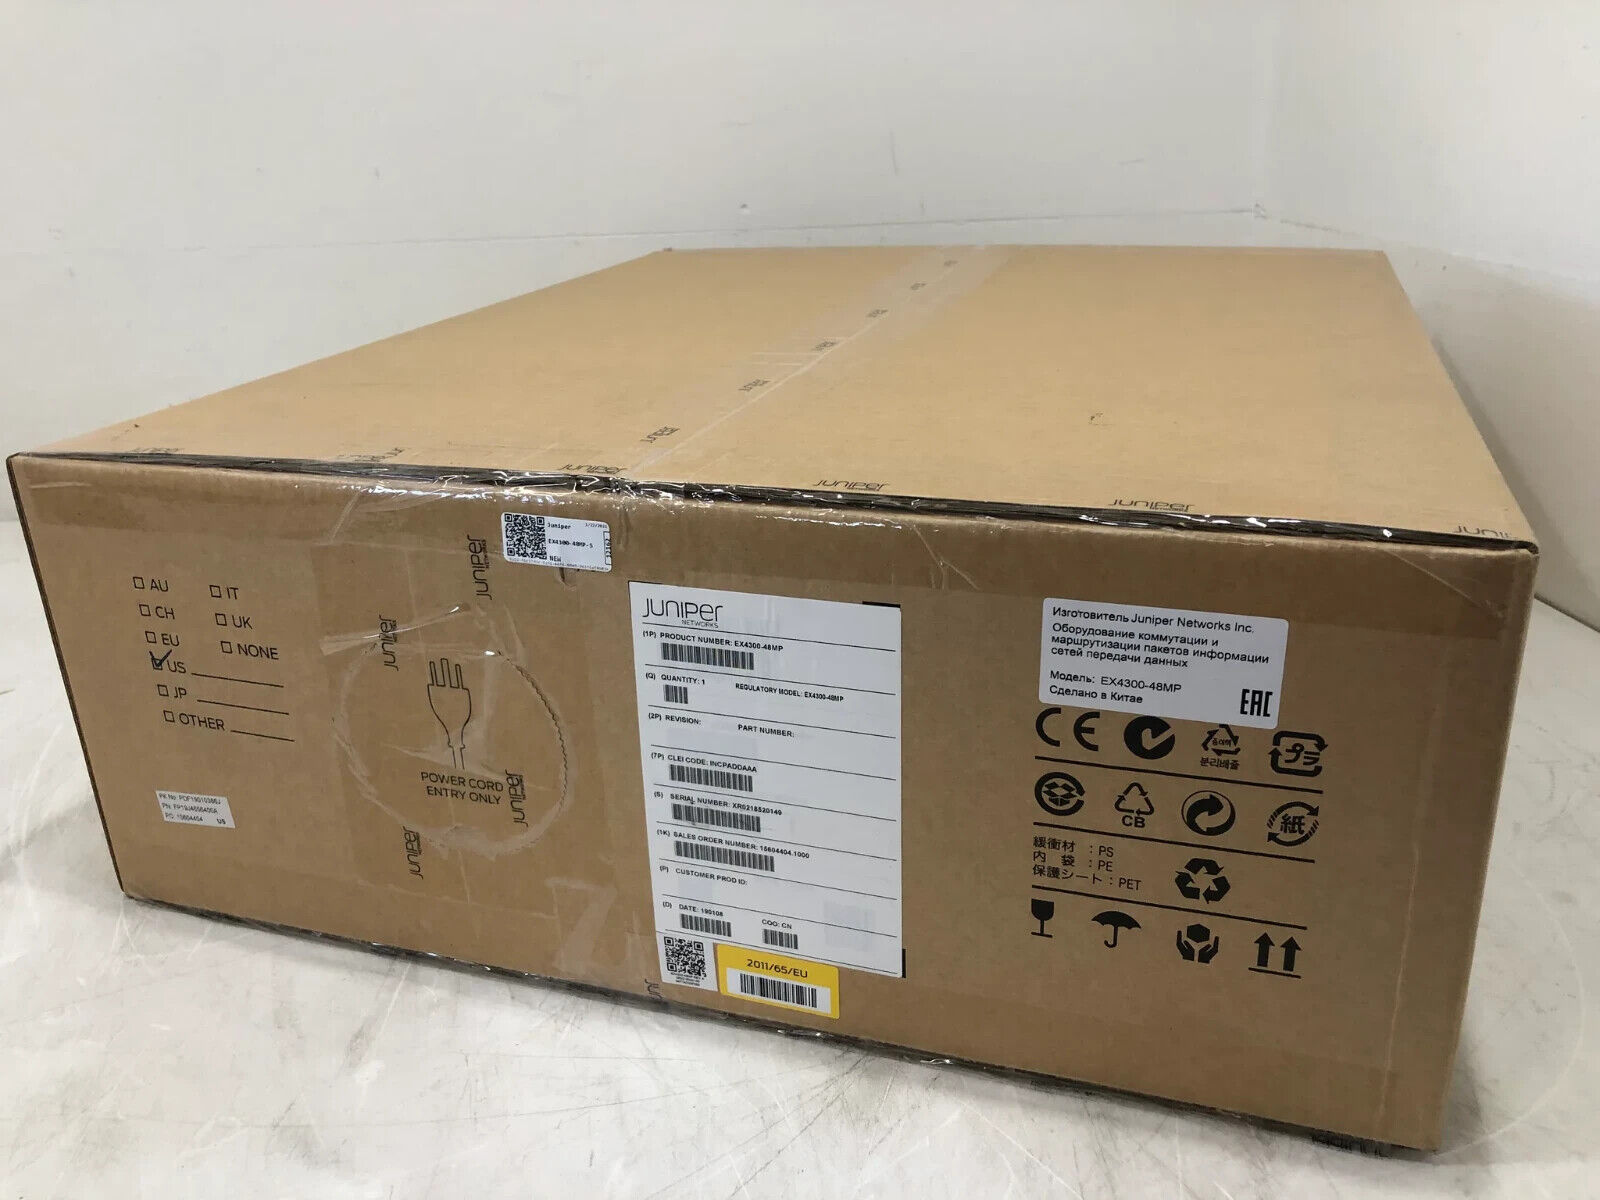 Juniper EX4300-48MP / NEW Sealed / Ready to Ship / 100/1/2.5/5/10GBPS